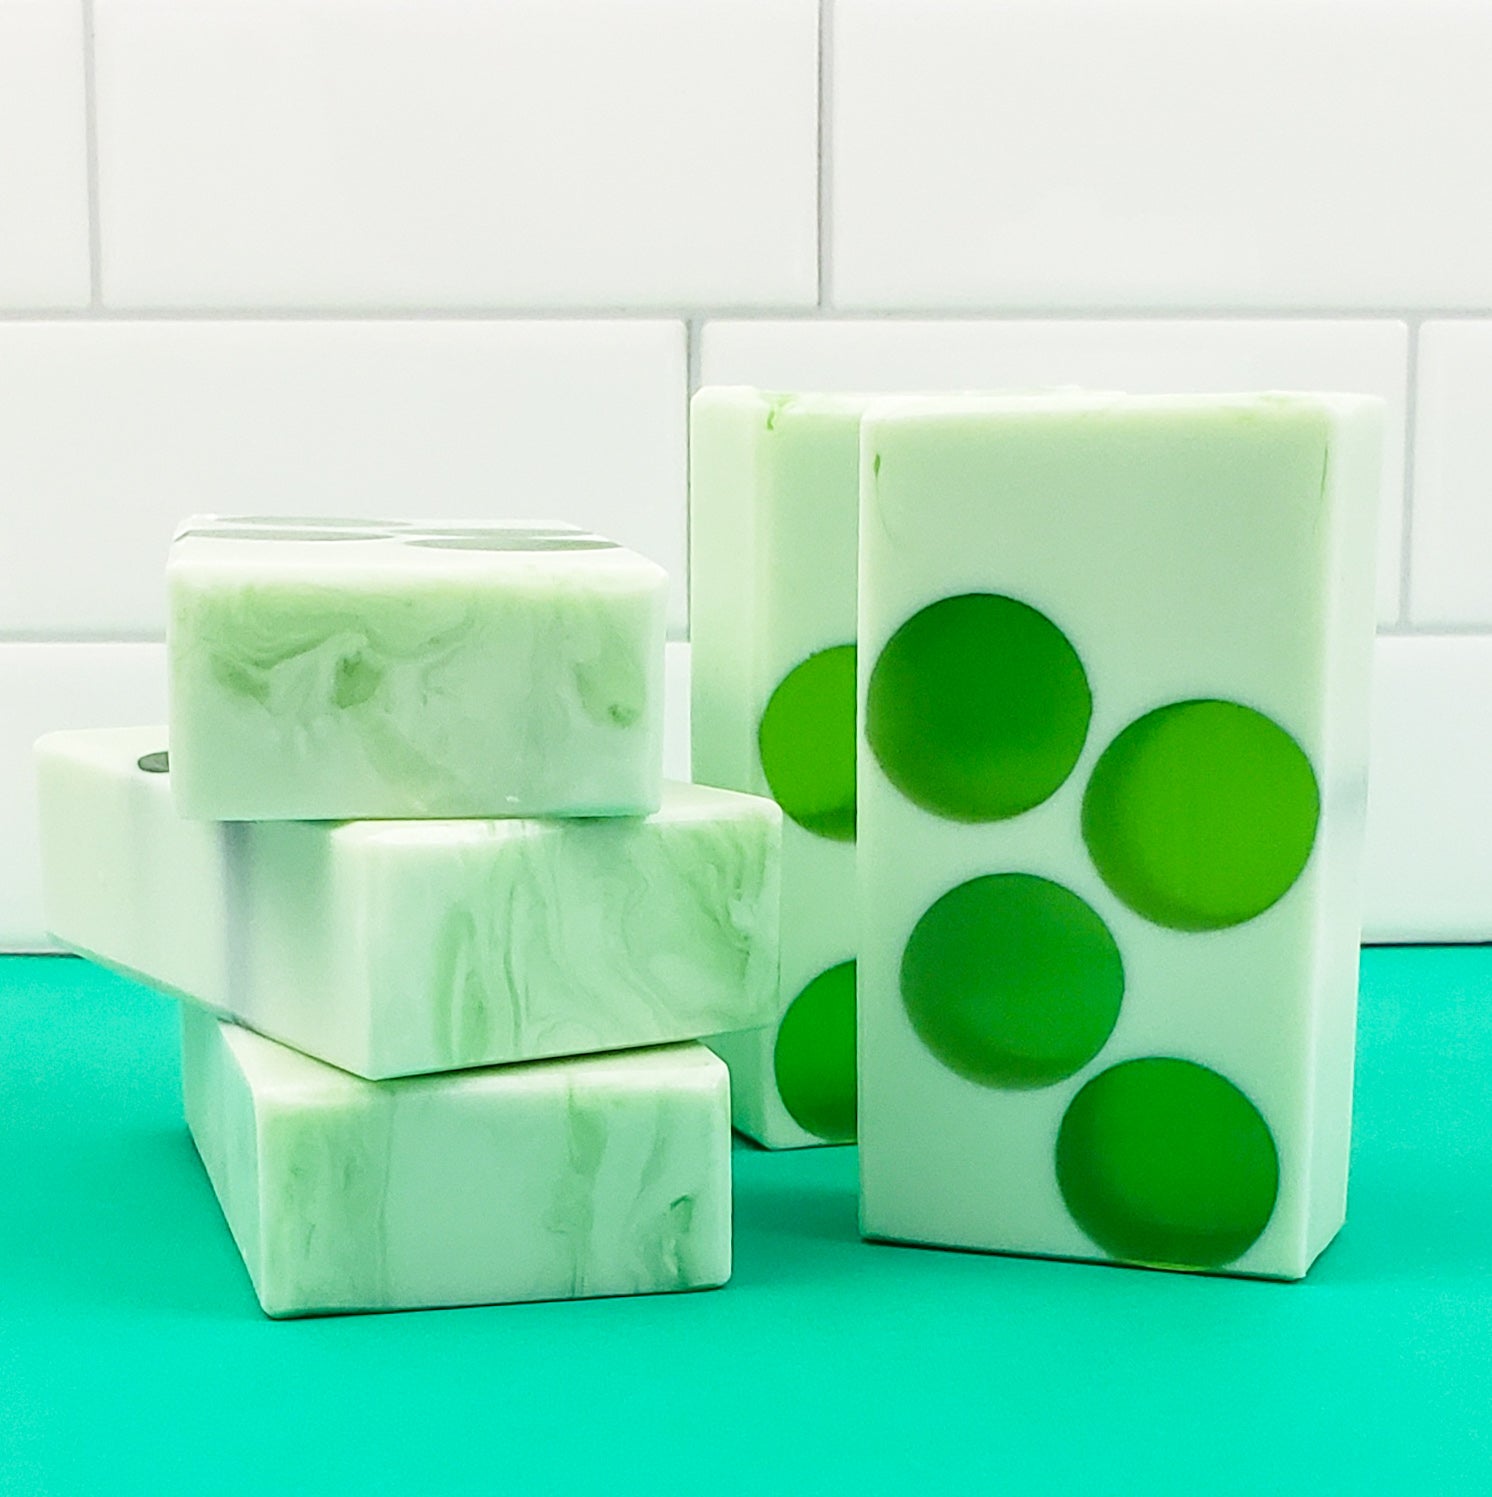 Light green soap bars with dark green translucent circles in the middle